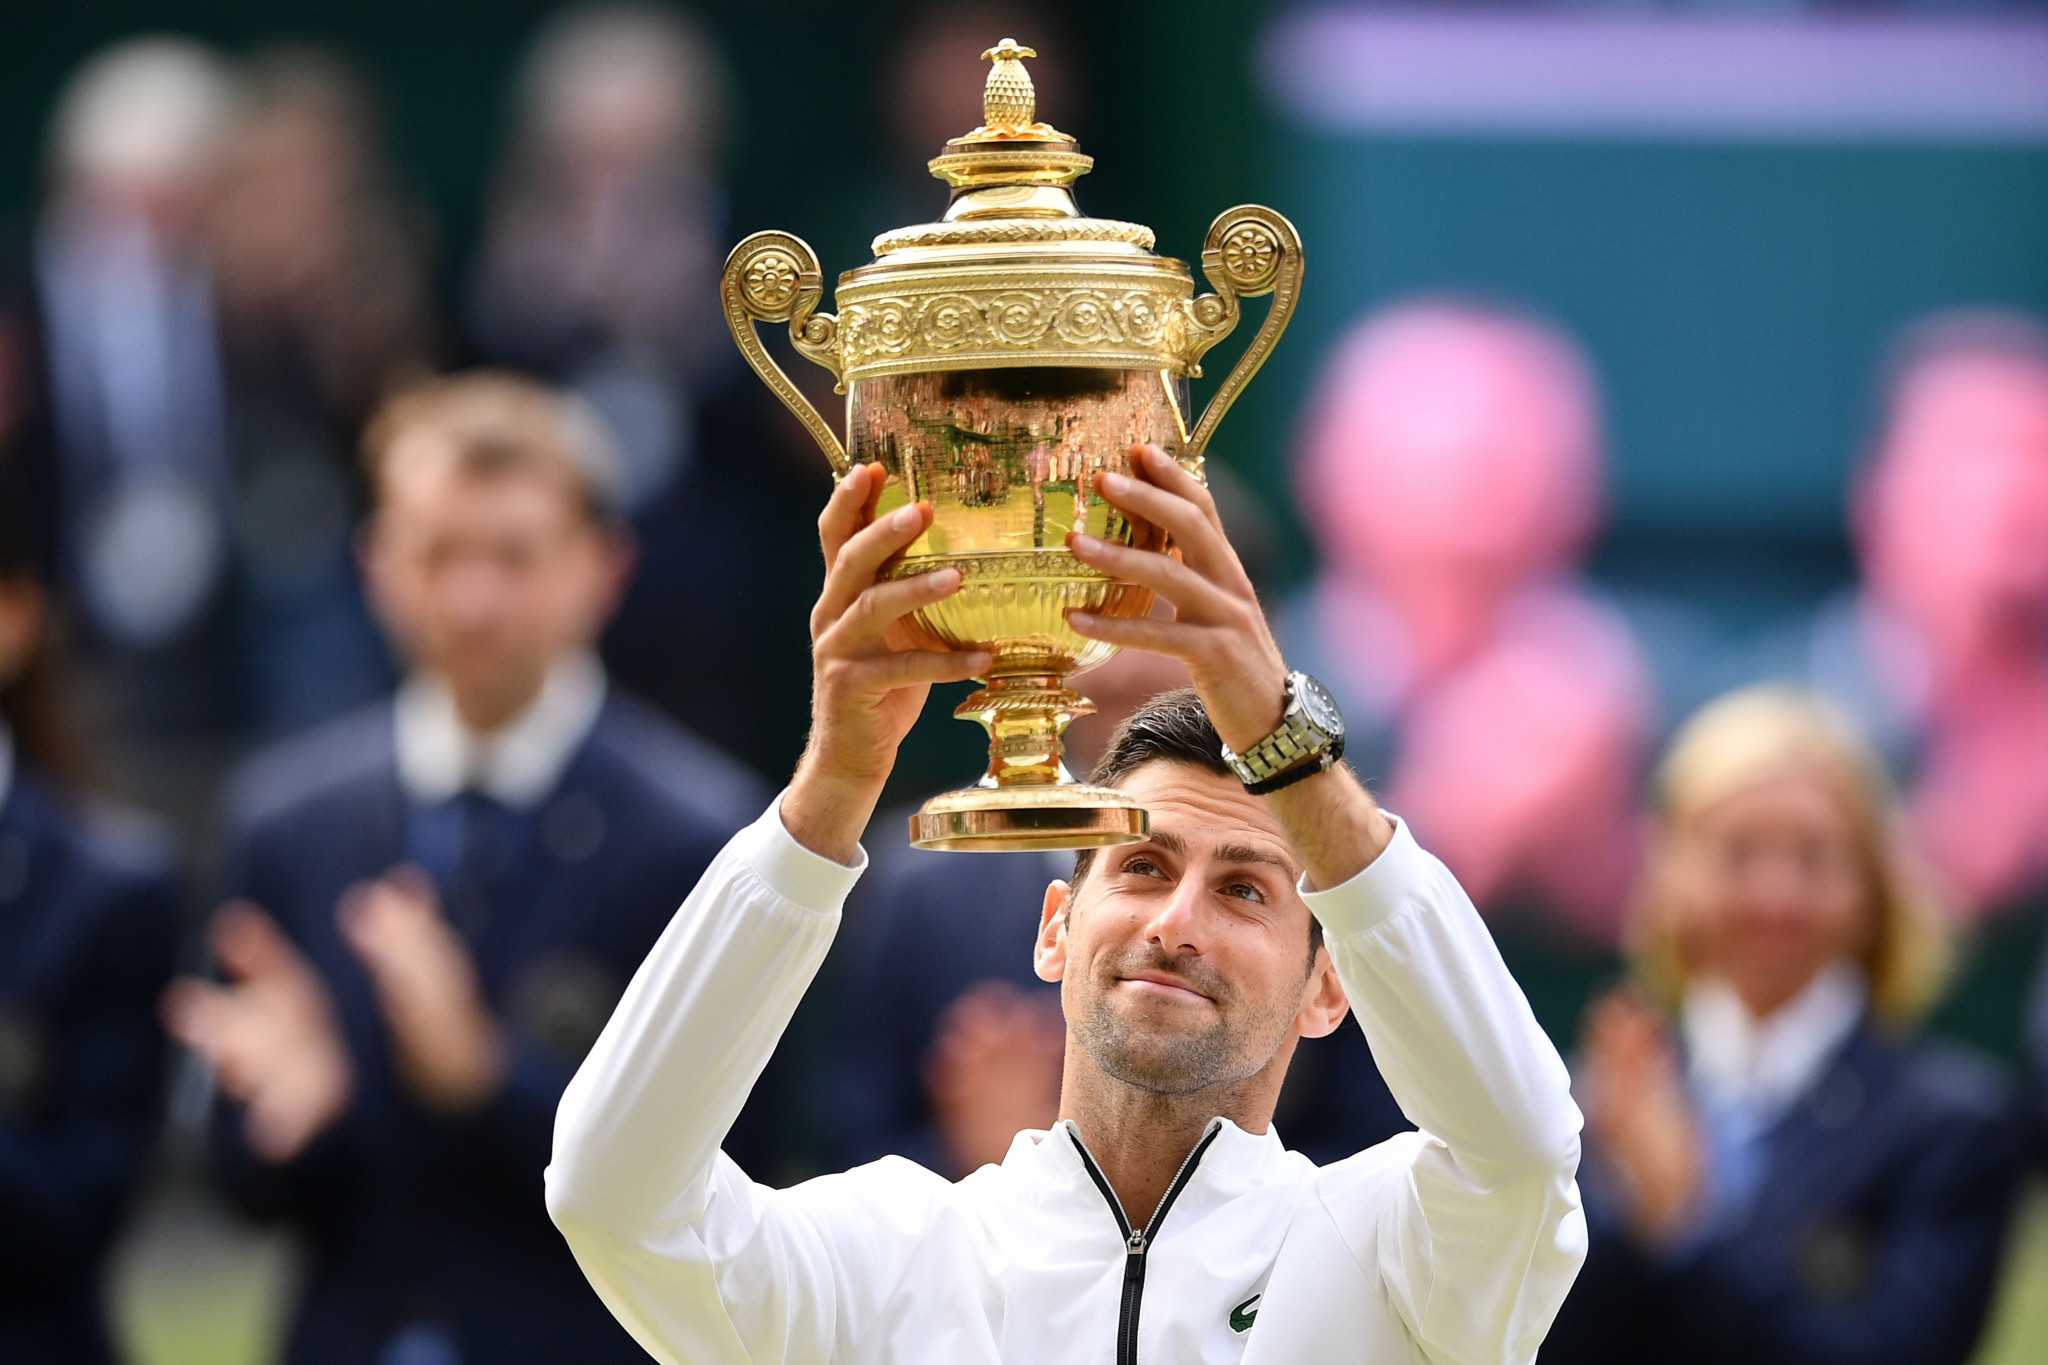 Novak Djokovic celebrates winning the Wimbledon title for a fifth time ©Getty Images